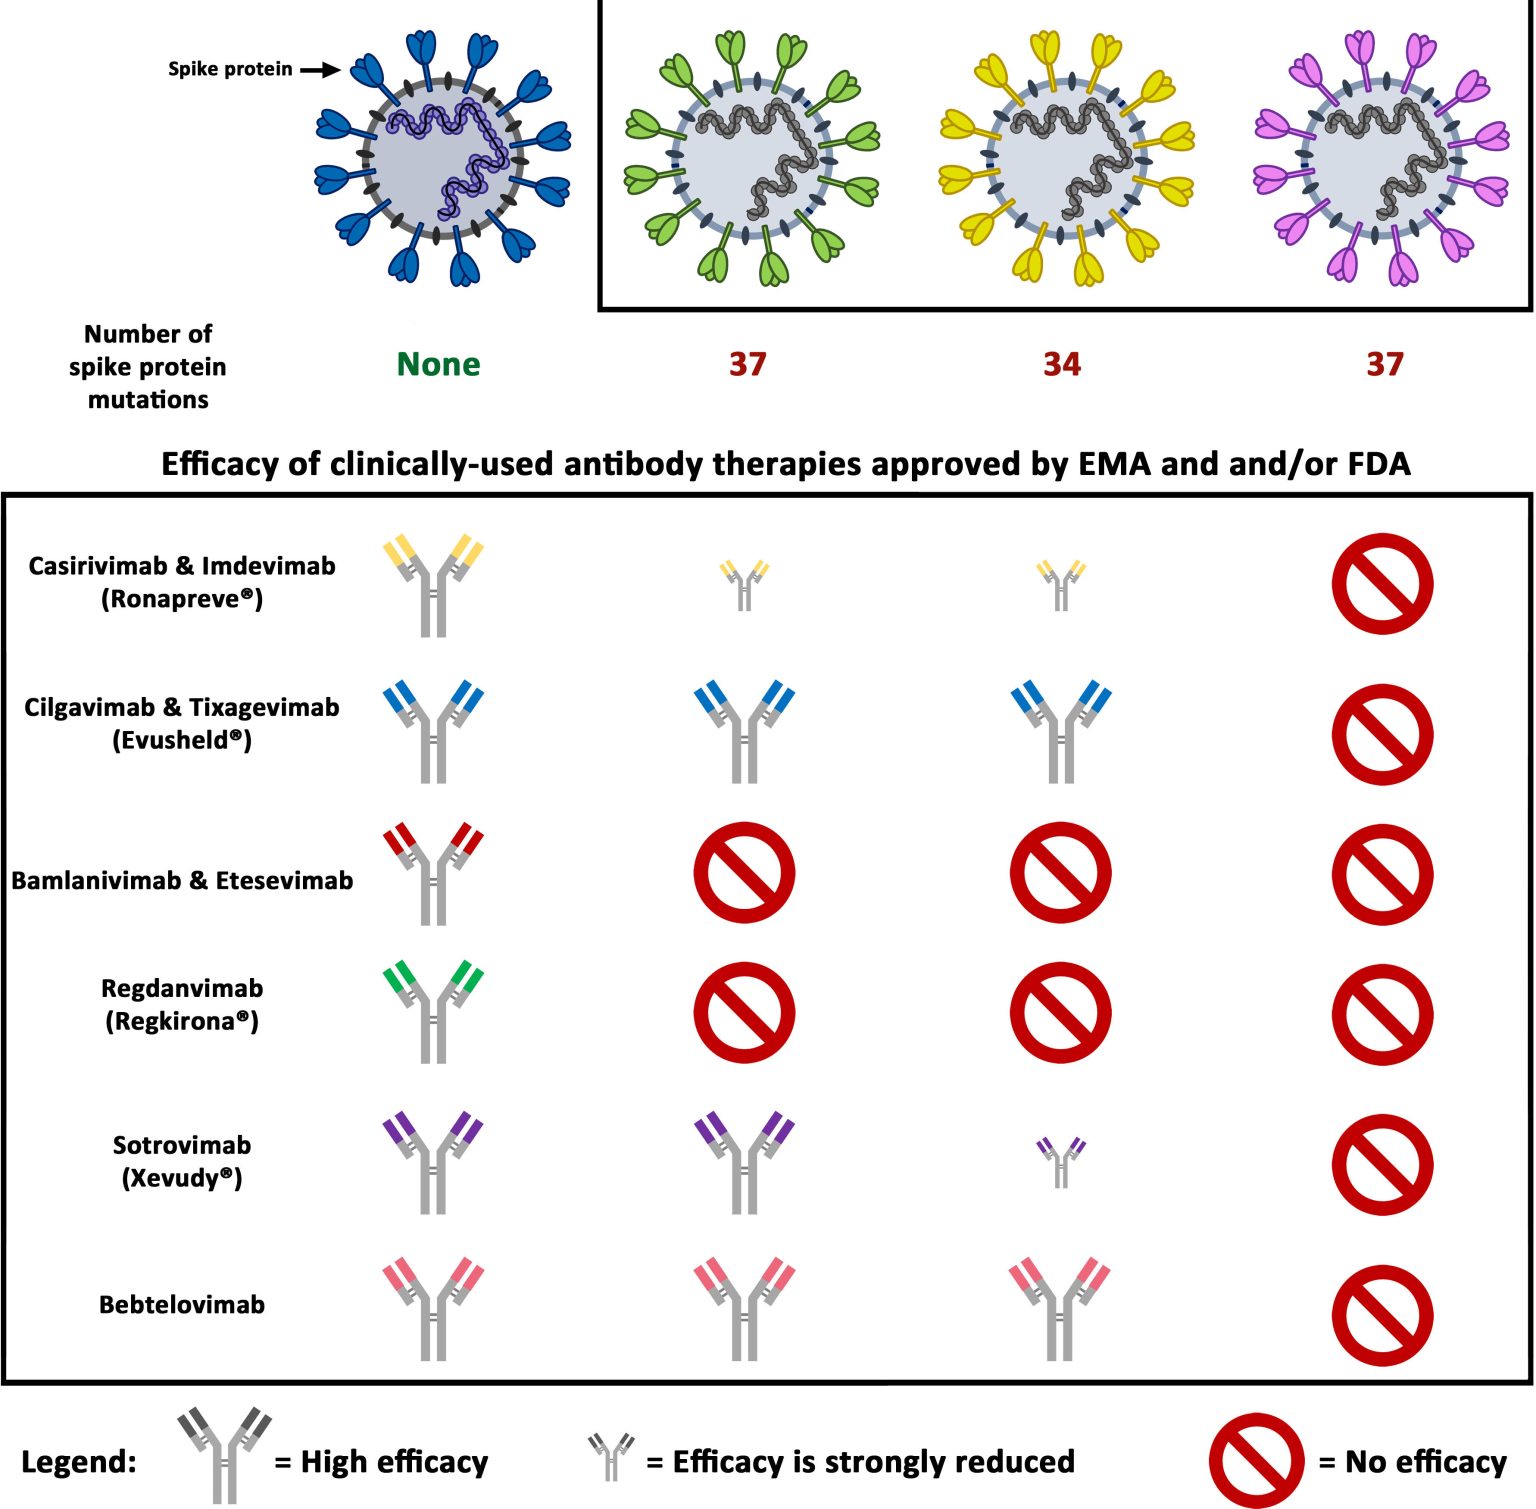 Efficiacy-of-Clinically-Used-Antibody-Therapies-Approved-by-EMA-and-FDY-1536x1509.jpg